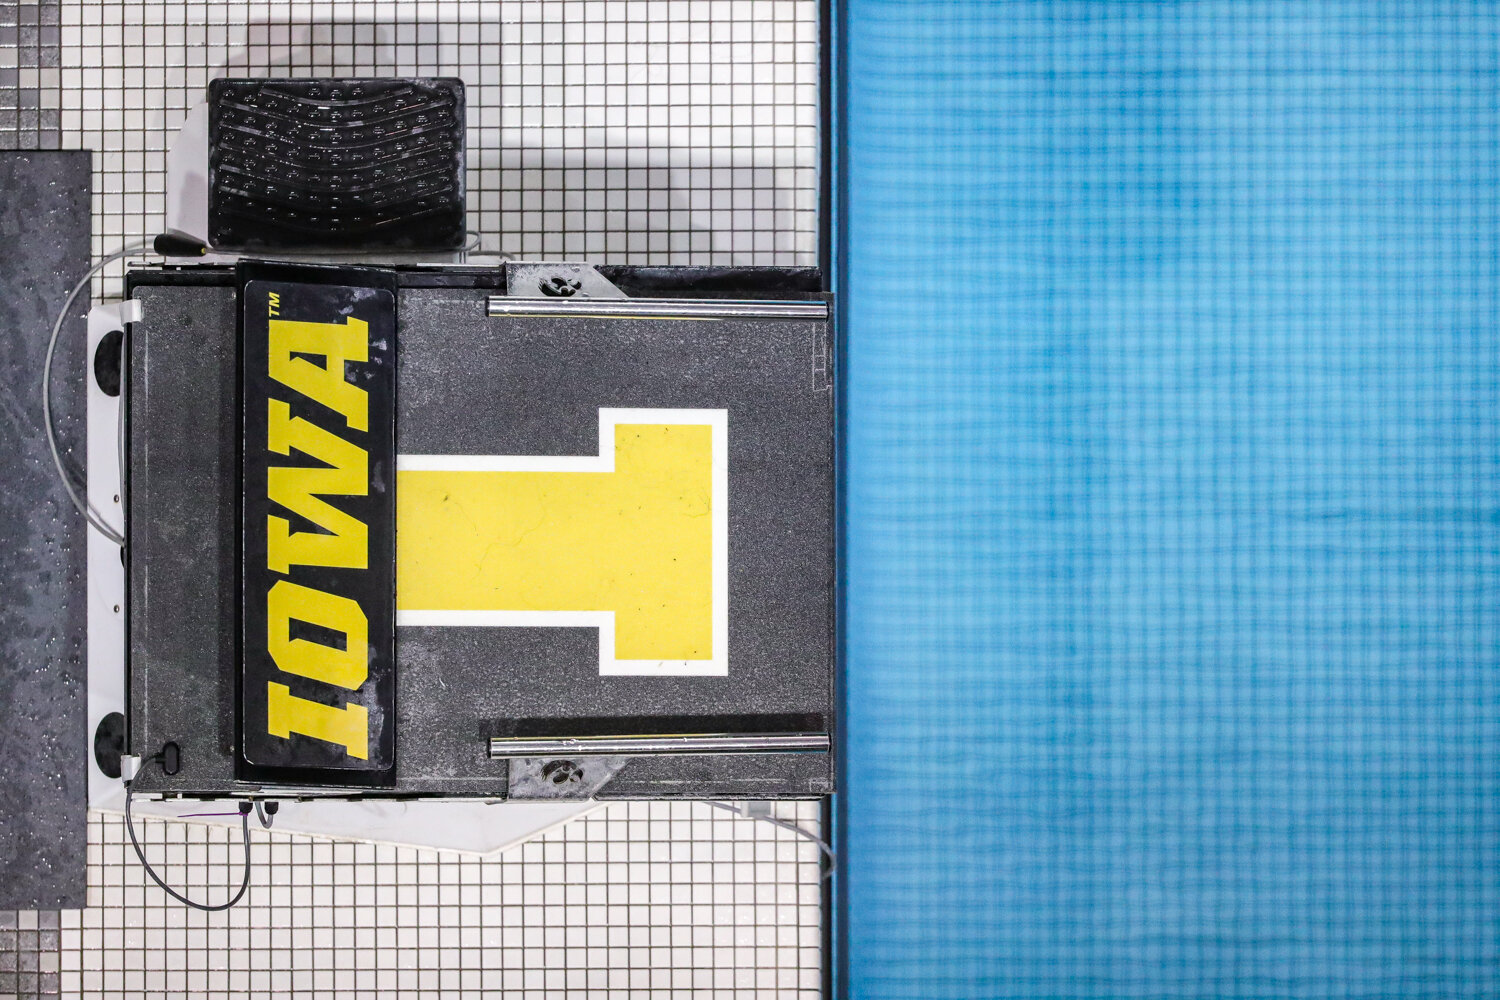  A starting block at the Campus Welfare and Recreation Center at the University of Iowa during the Big Ten Women’s Swimming and Diving Championship on Thursday, Feb. 20, 2020.  